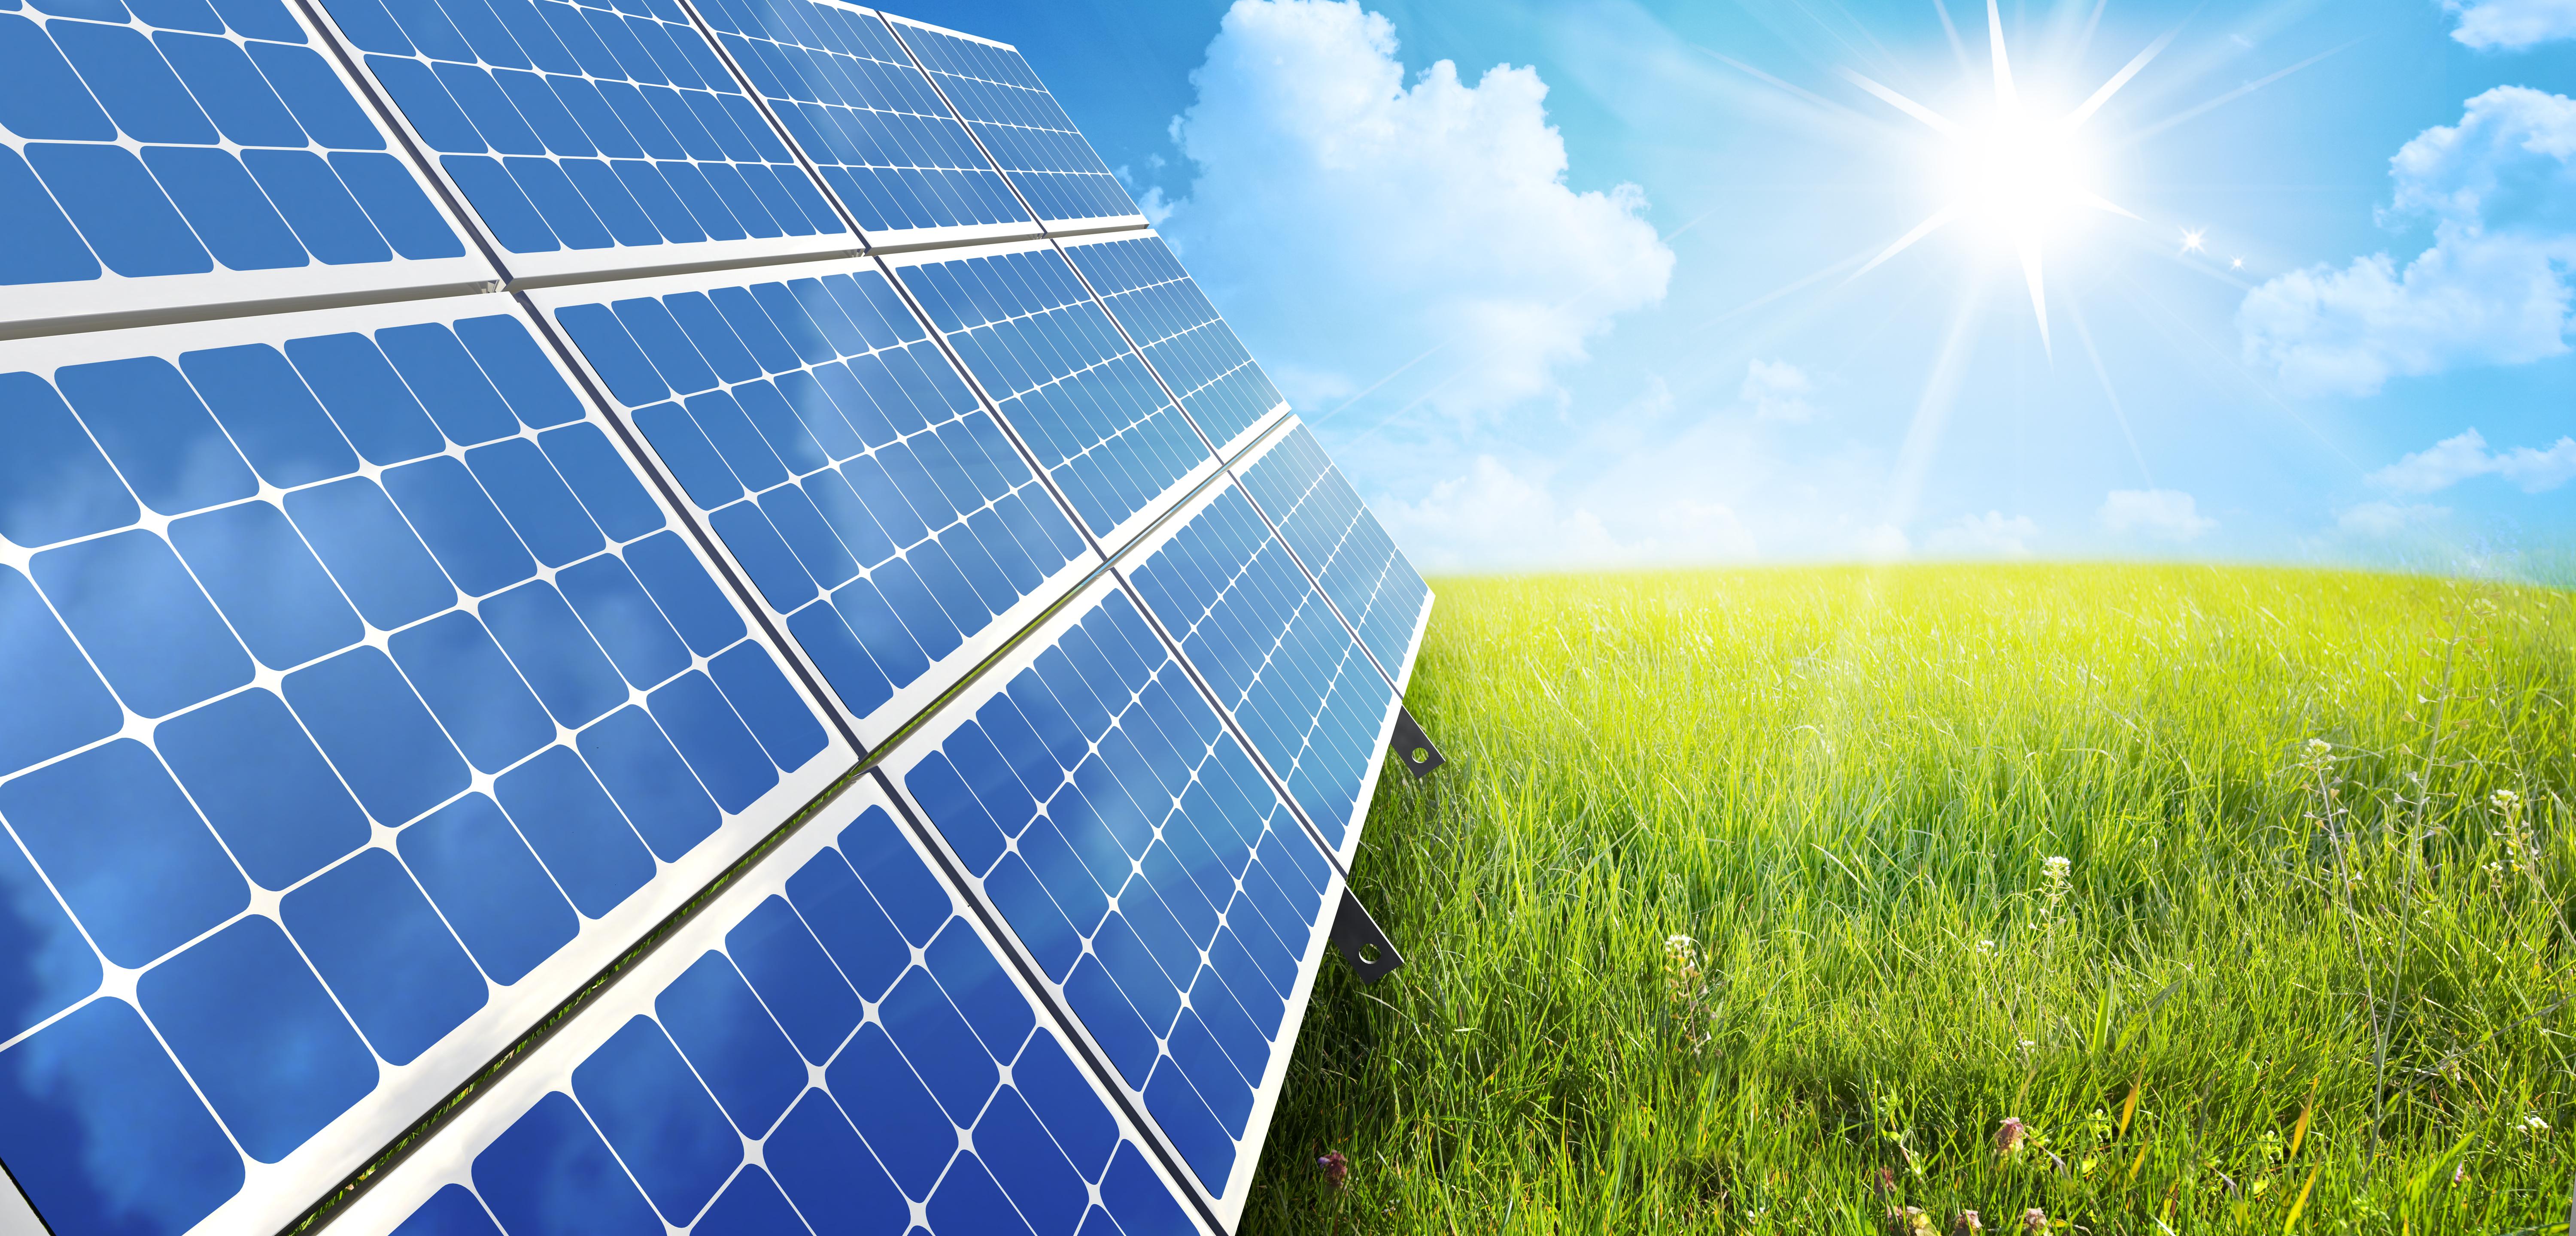 Solar Photovoltaic Technologies Fueling Thin Film Energy Markets